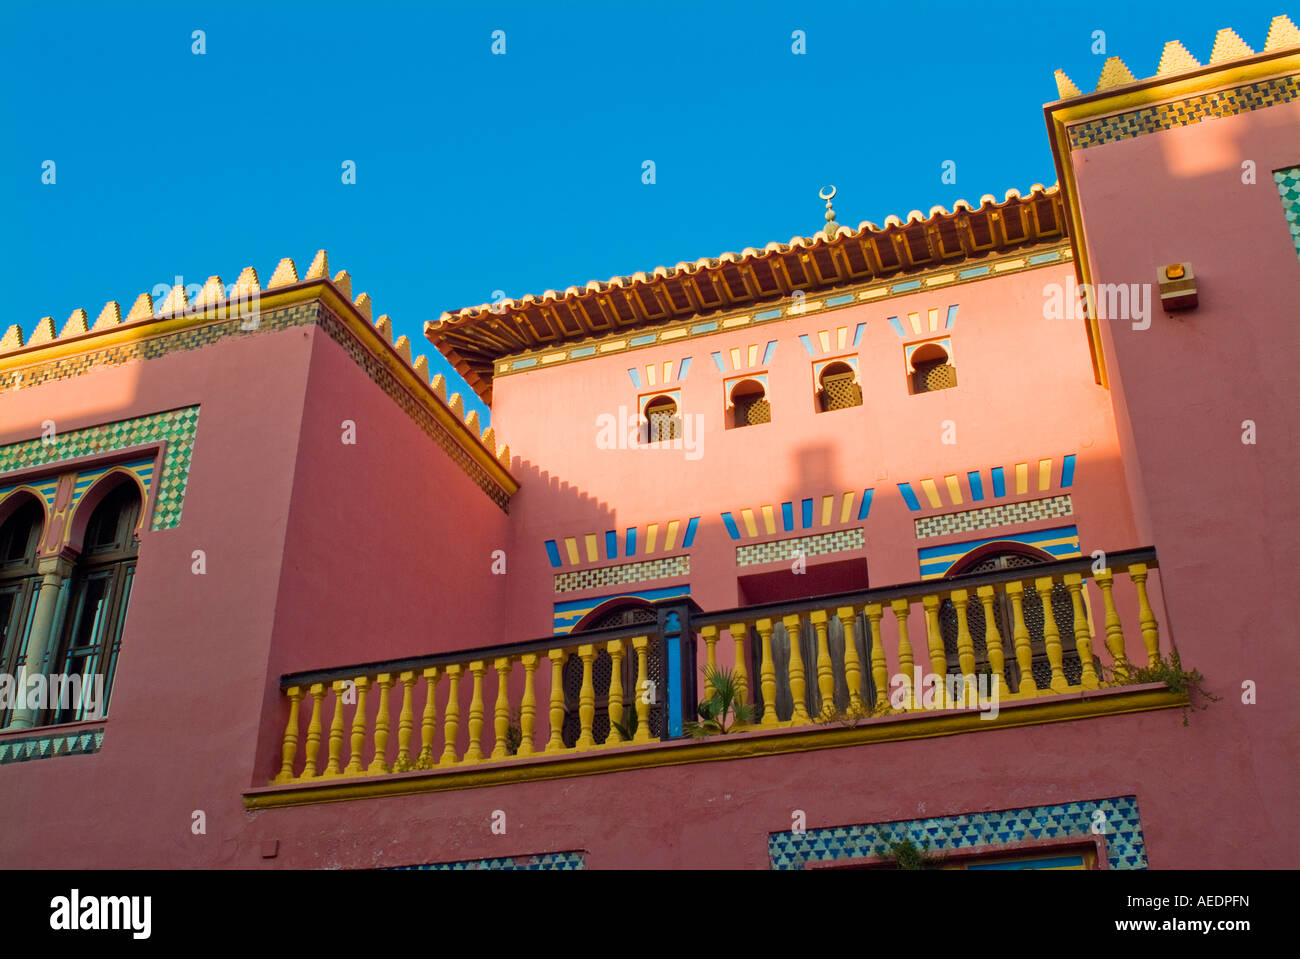 NEO MUDEJAR BUILDING THAT SERVES AS THE OFFICE DE TURISMO THE TOURIST OFFICE IN ALMUNECAR SPAIN Stock Photo